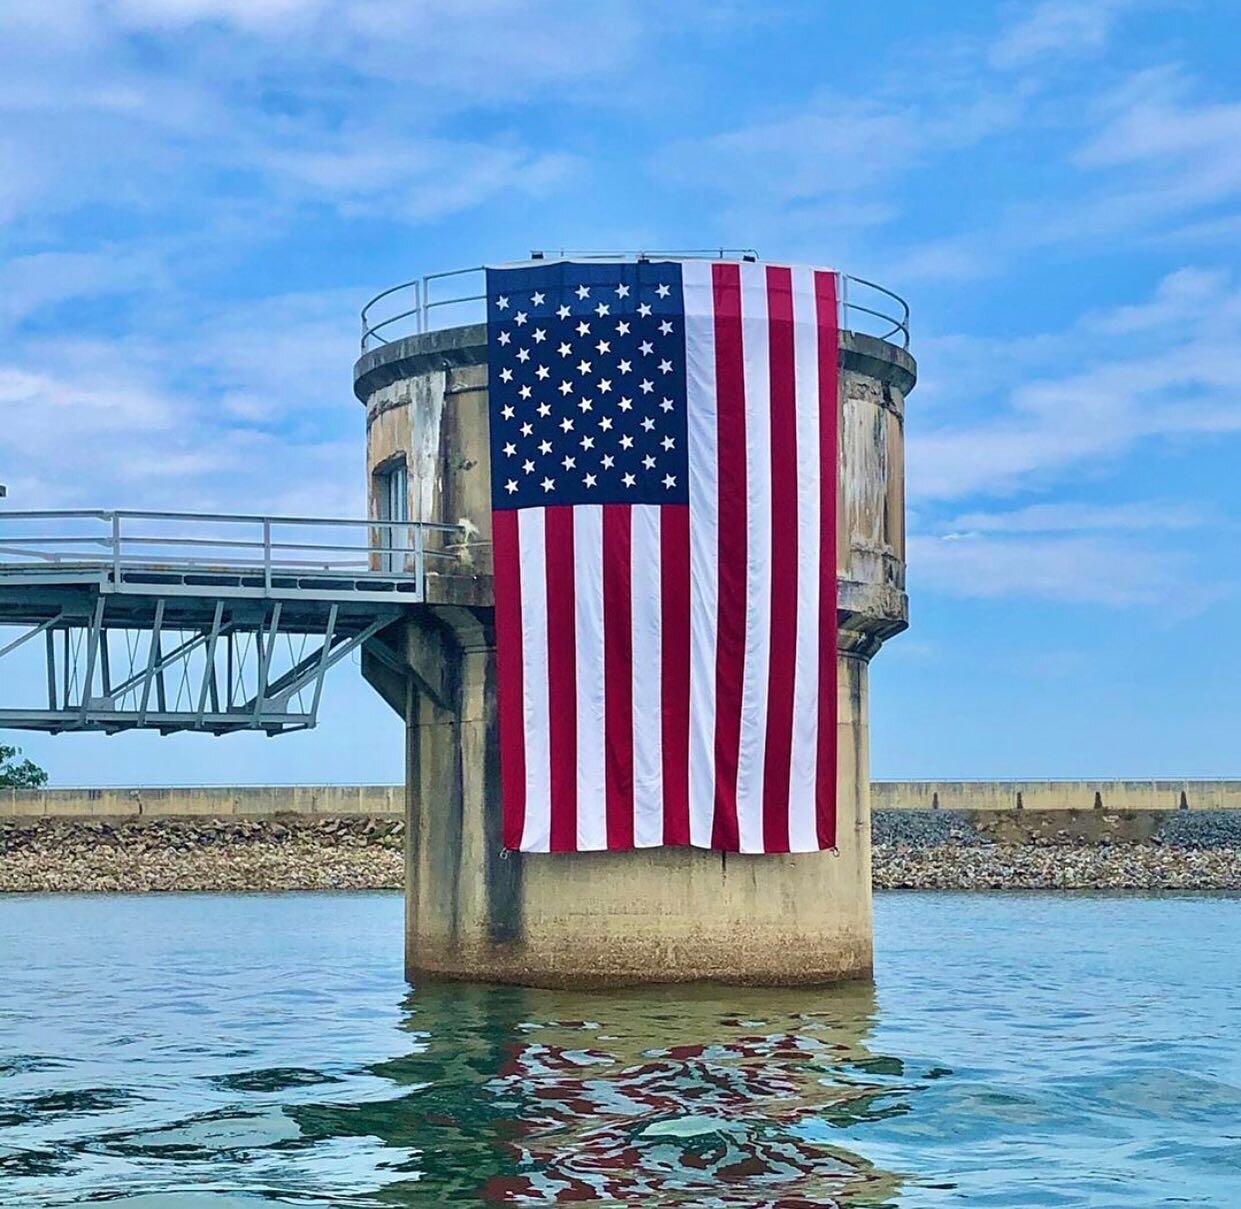 Happy 4th of July! Everyone please stay safe and enjoy this beautiful day! There will be fireworks at dusk at the dam tonight! Look at our fireworks highlight for more information, and don&rsquo;t forget to tag us in your LBR photos and firework vide